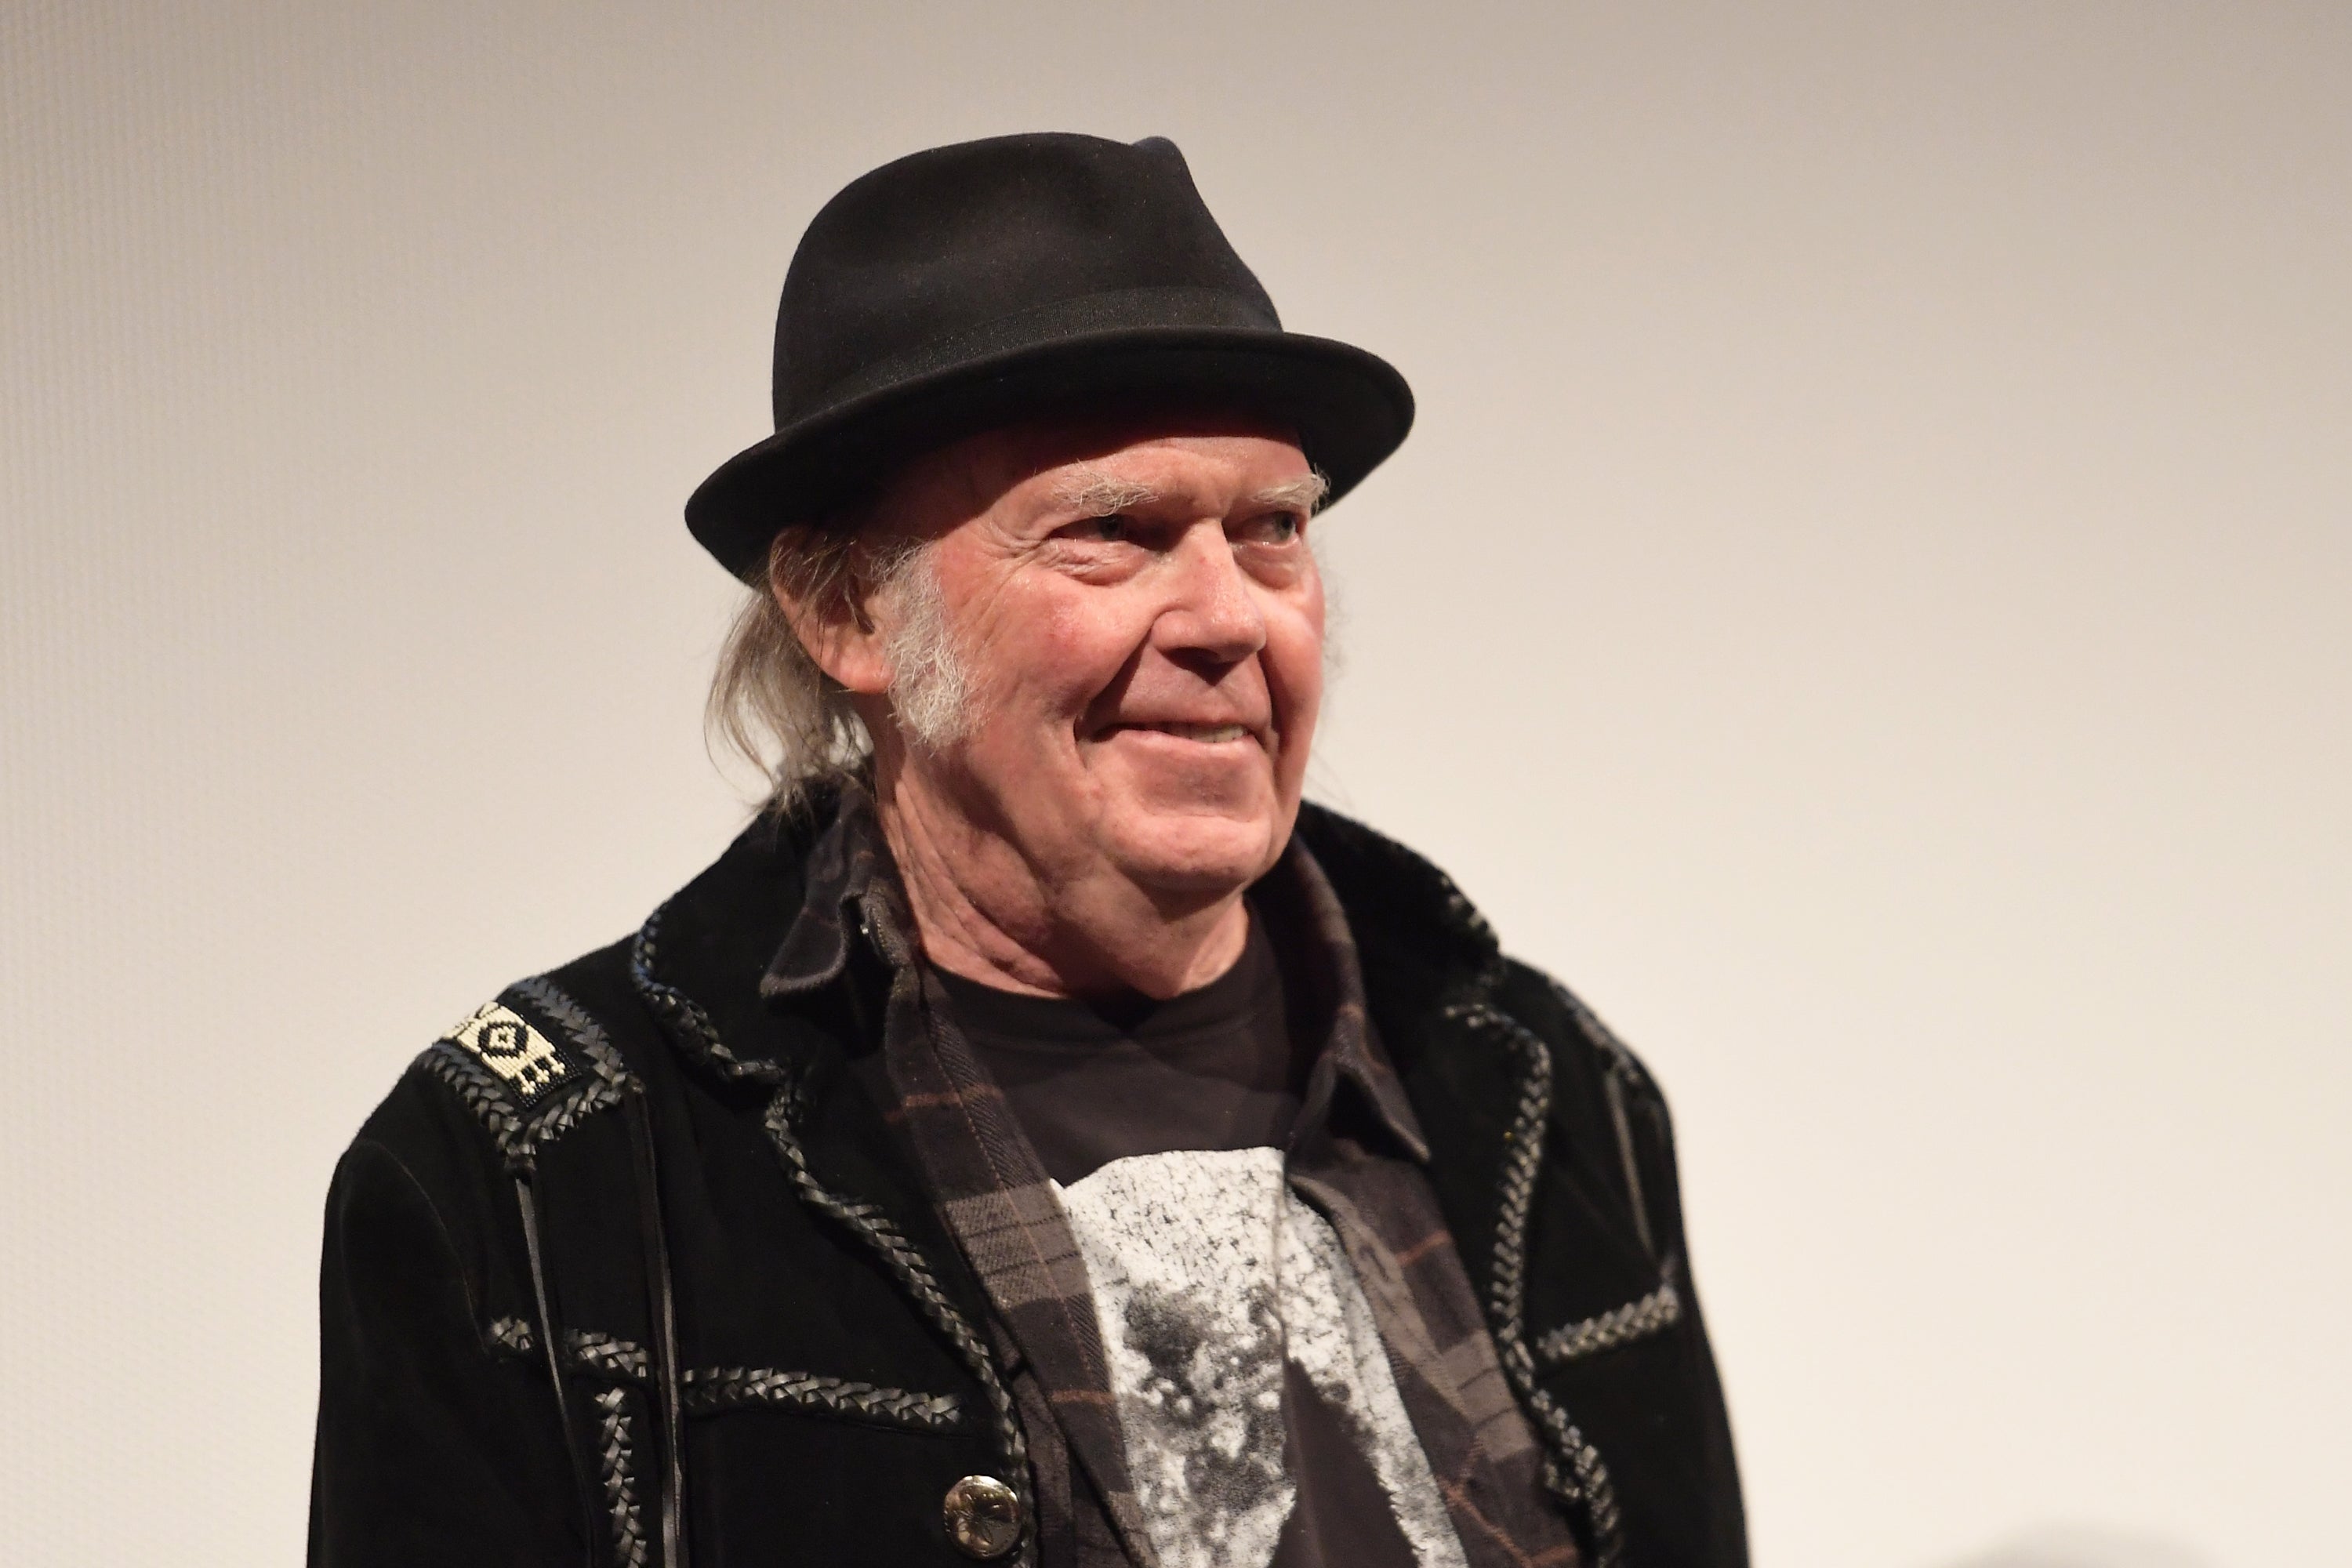 Neil Young’s post consists of a news article highlighting The Cure’s recent Ticketmaster debacle